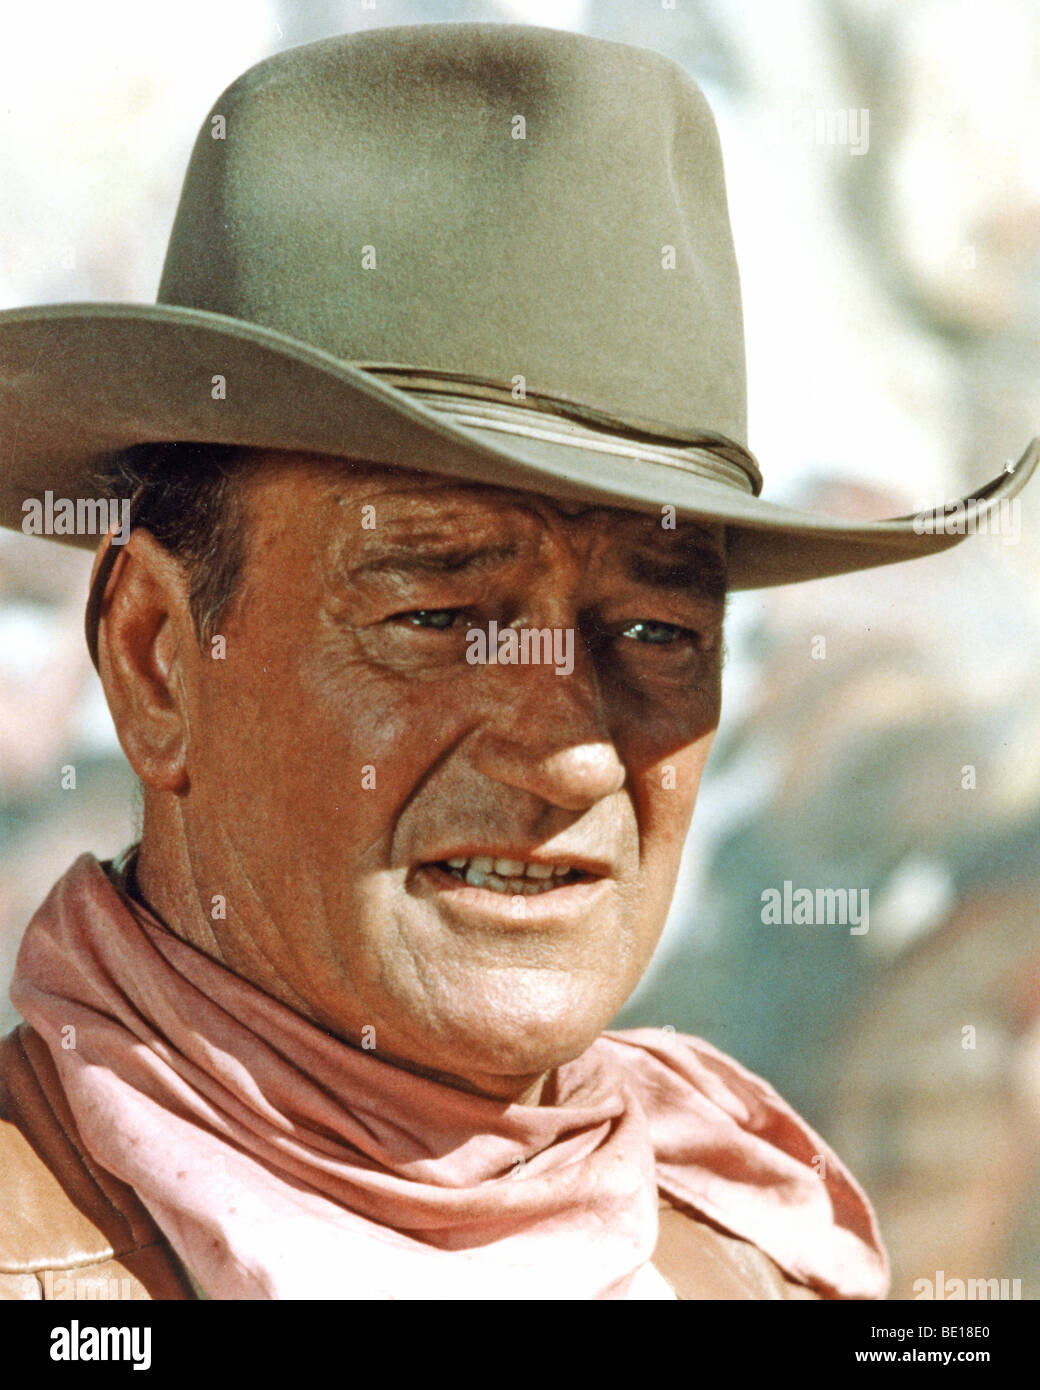 JOHN WAYNE - US film actor famous for his Western roles Stock Photo